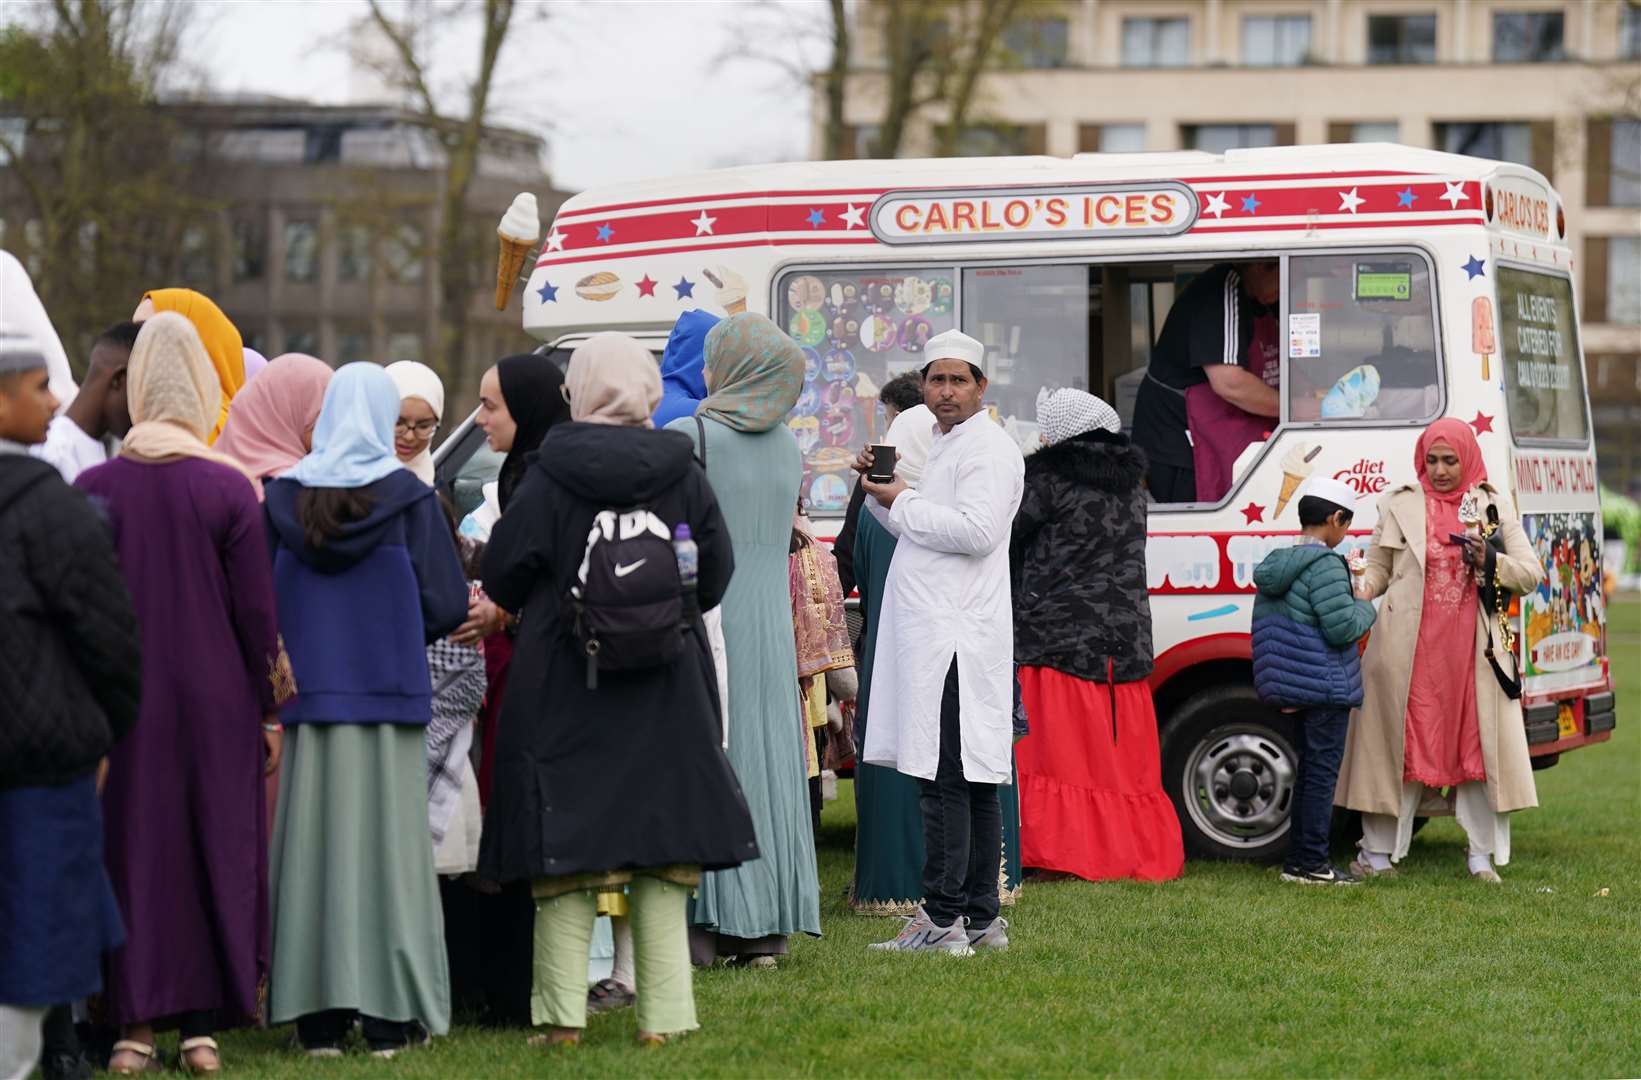 People queued for ice cream in Parker’s Piece, Cambridge (Joe Giddens/PA)